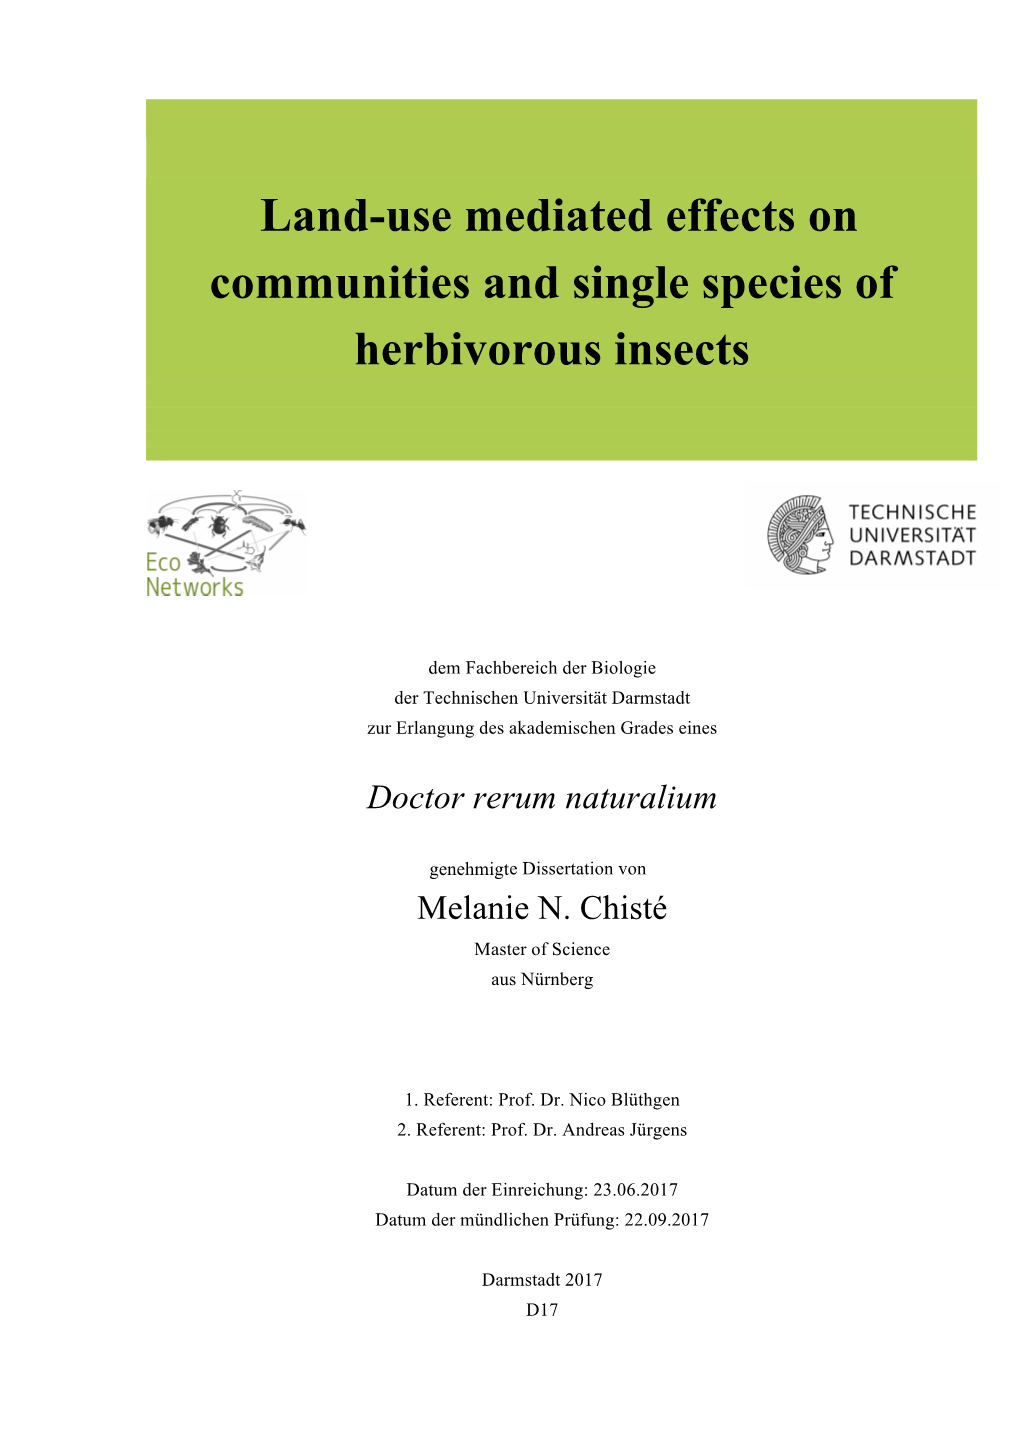 Land-Use Mediated Effects on Communities and Single Species of Herbivorous Insects